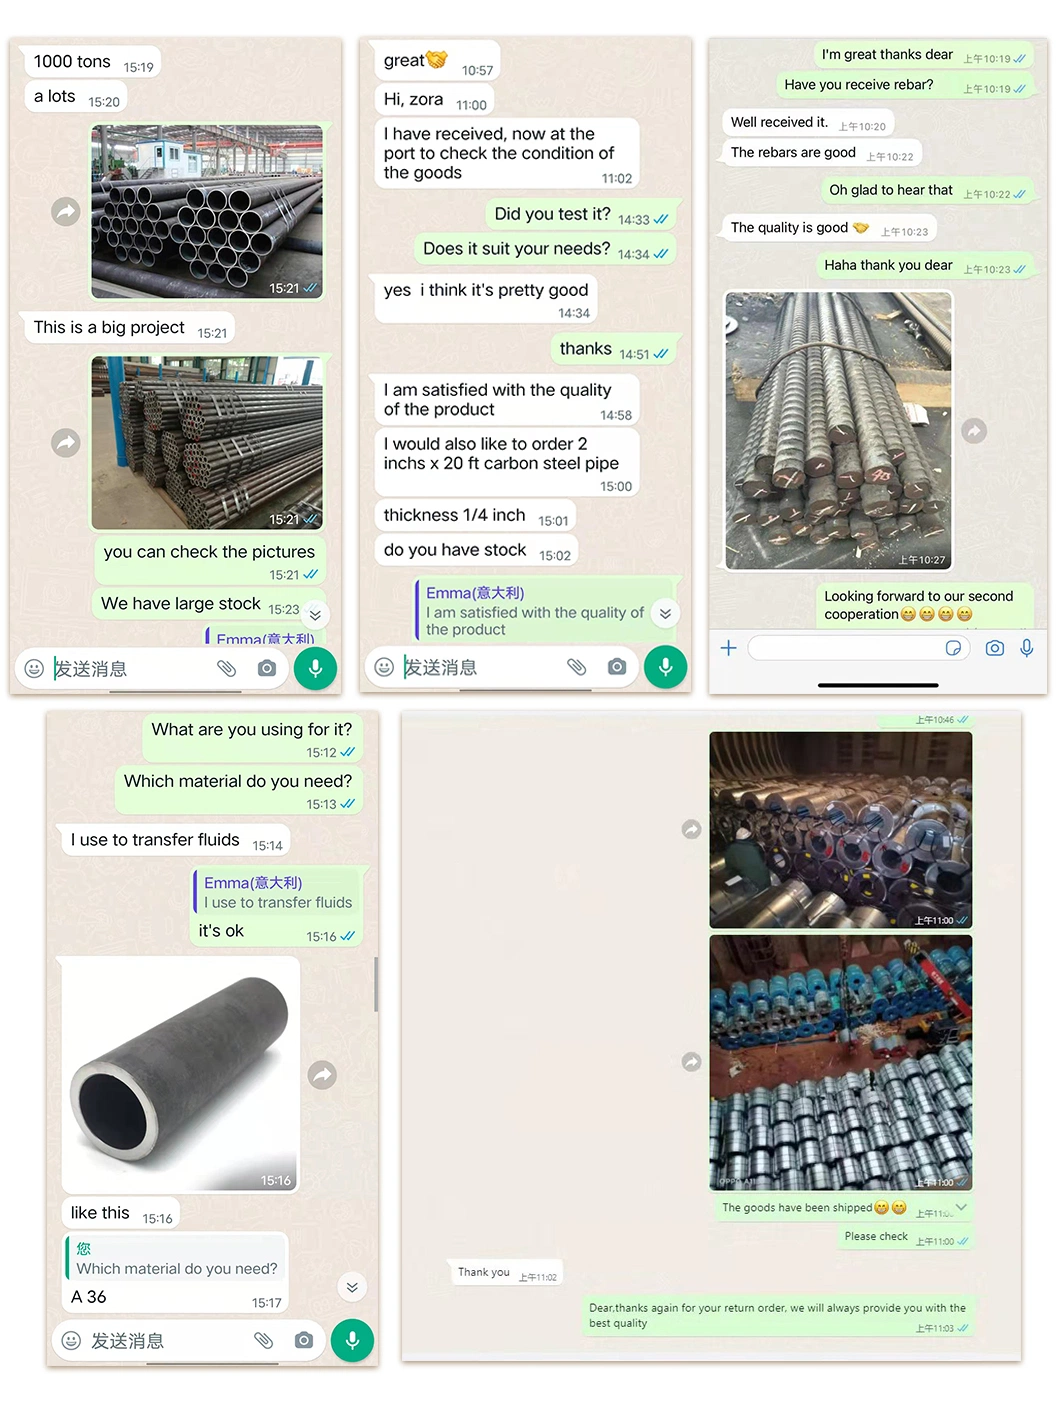 for Natural Gas and Oil Pipeline API 5L SSAW LSAW Spiral Welded Carbon SSAW Steel Pipe Tube